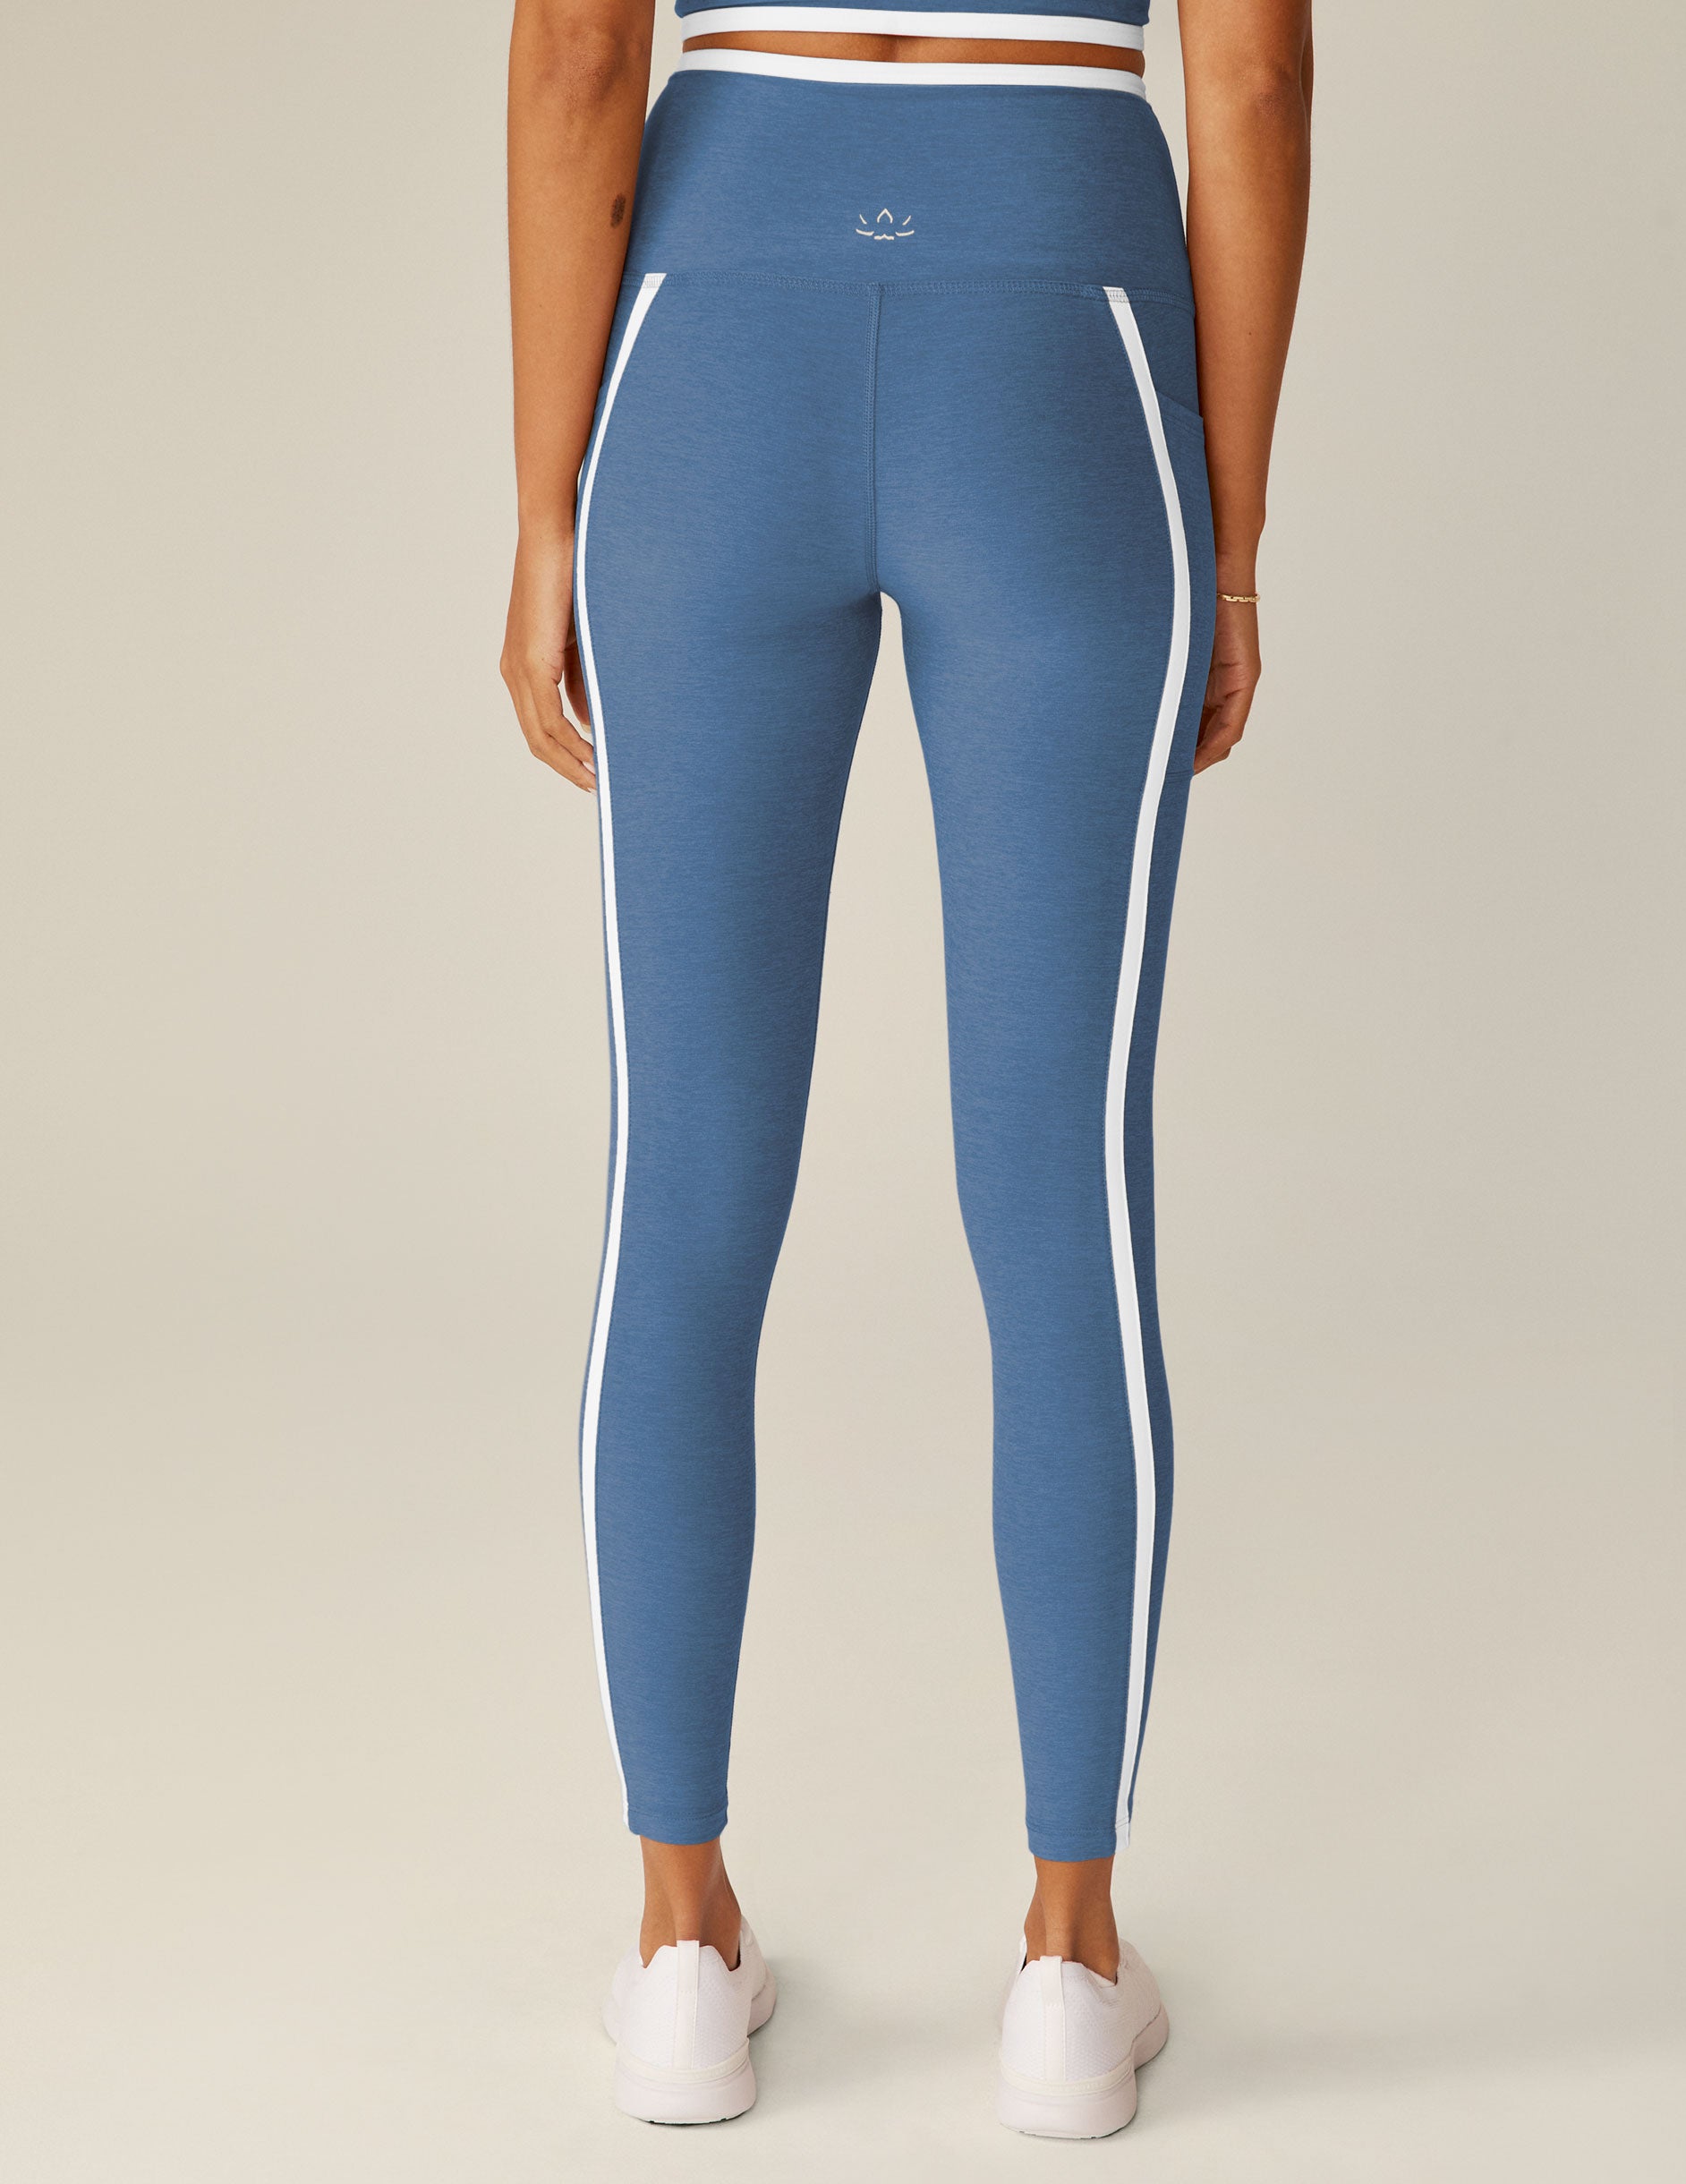 blue high-waisted midi leggings with white lining on waistband and down the sides. 